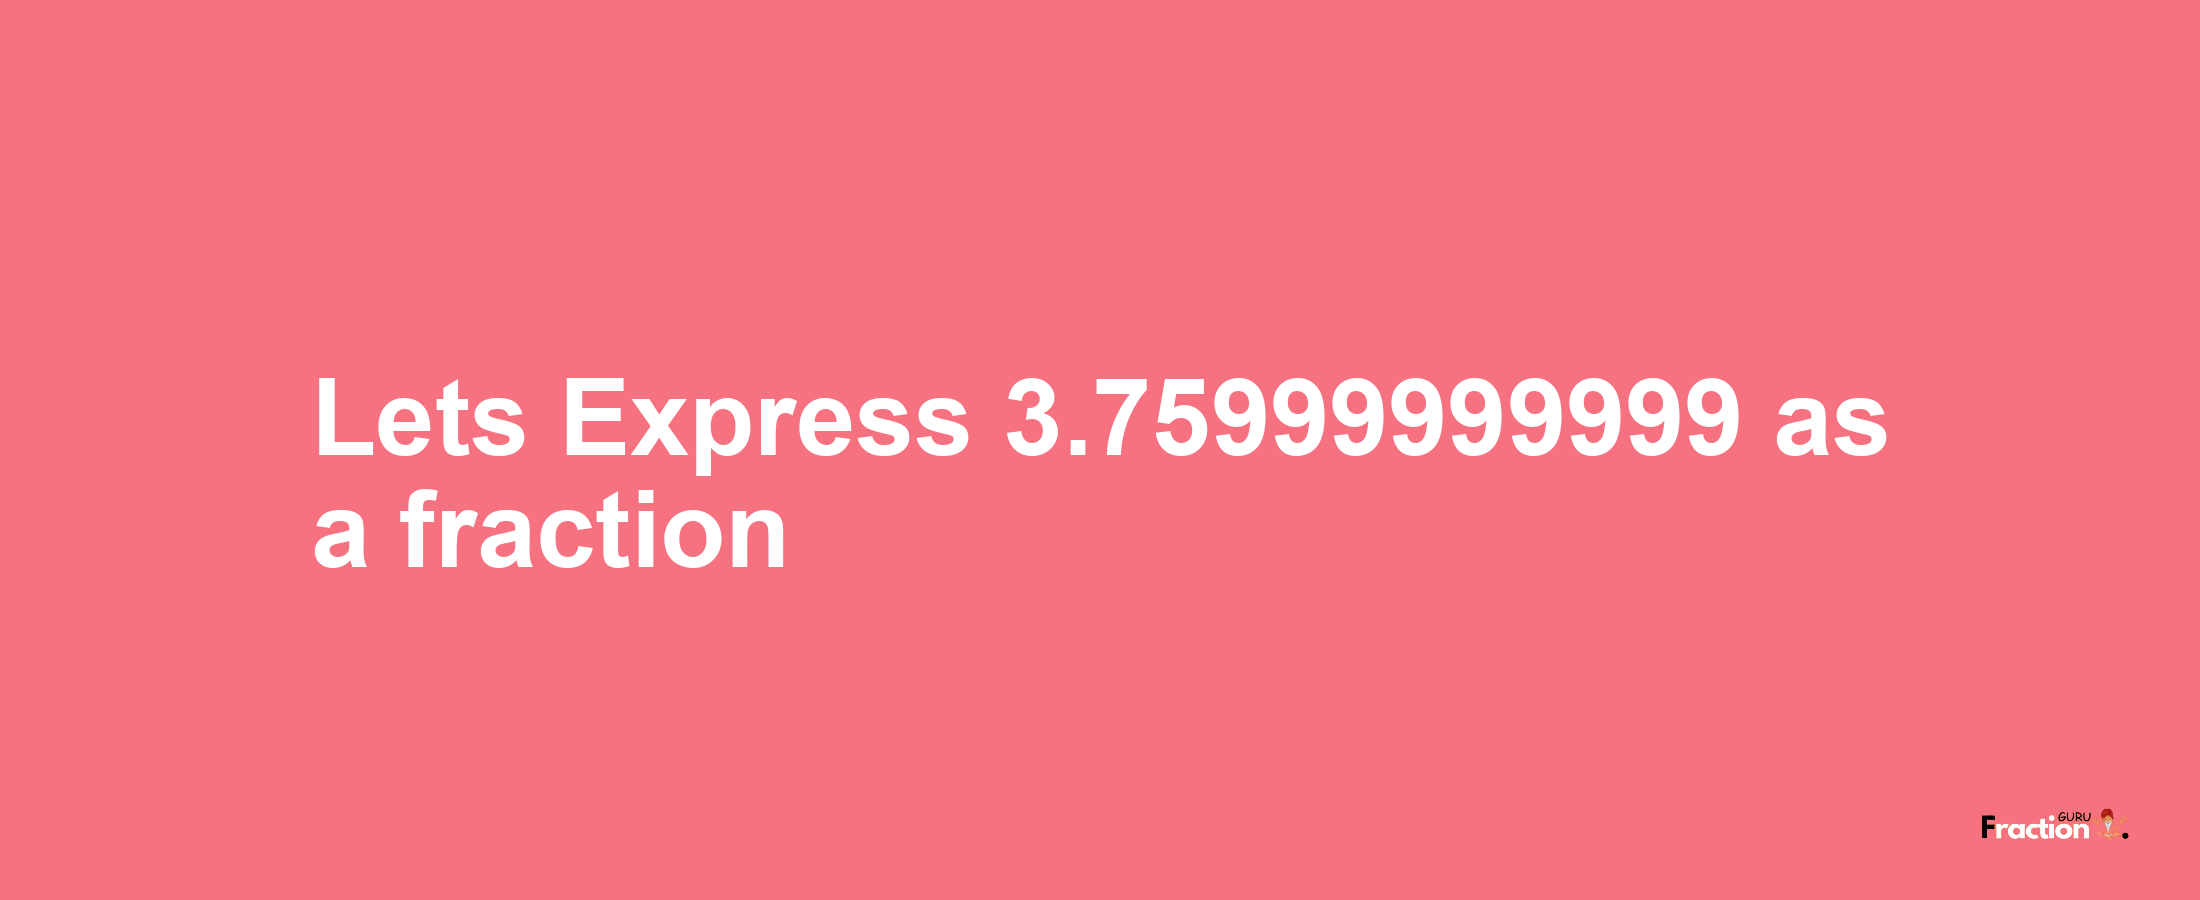 Lets Express 3.75999999999 as afraction